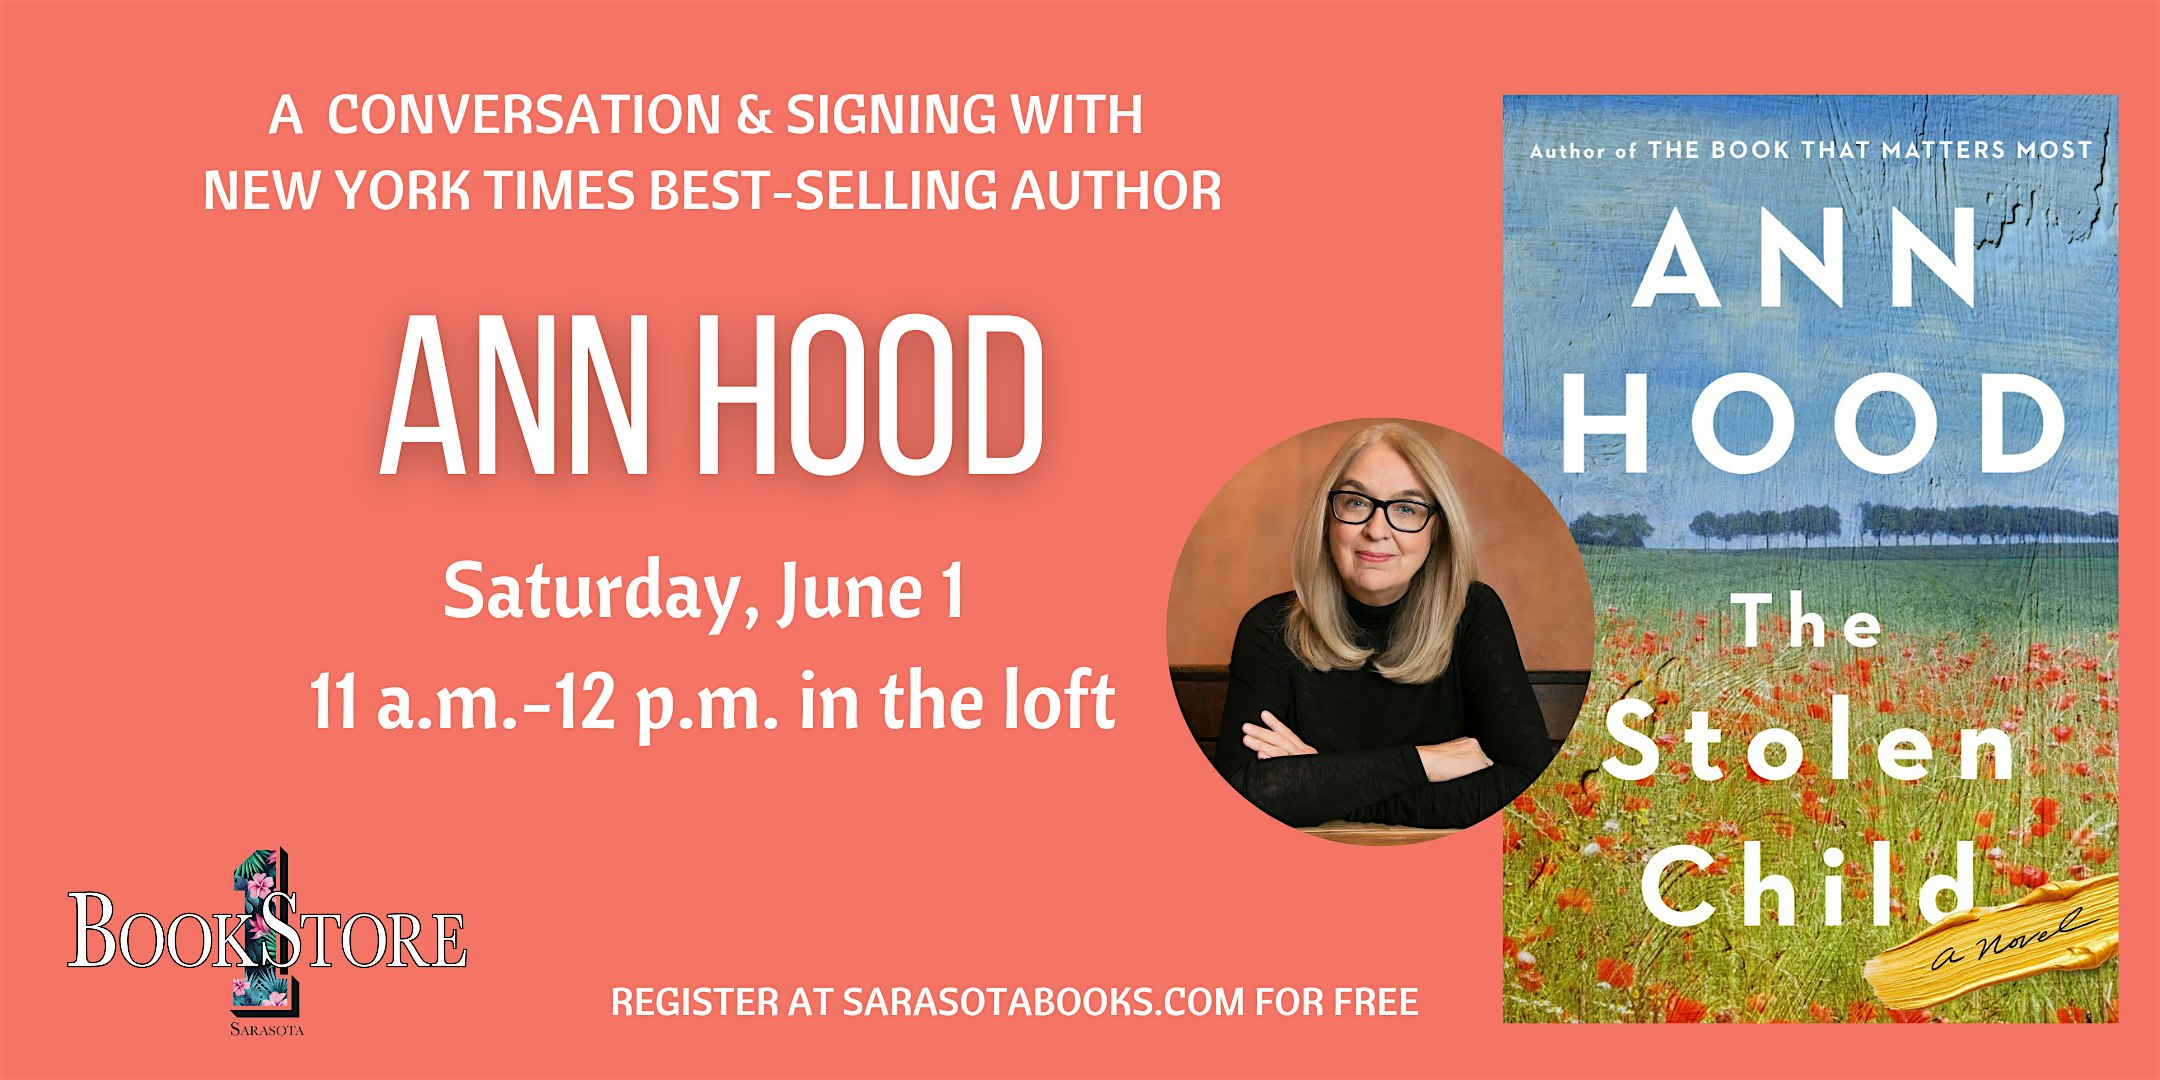 Talk and Book Signing with New York Times Best-Selling Author Ann Hood